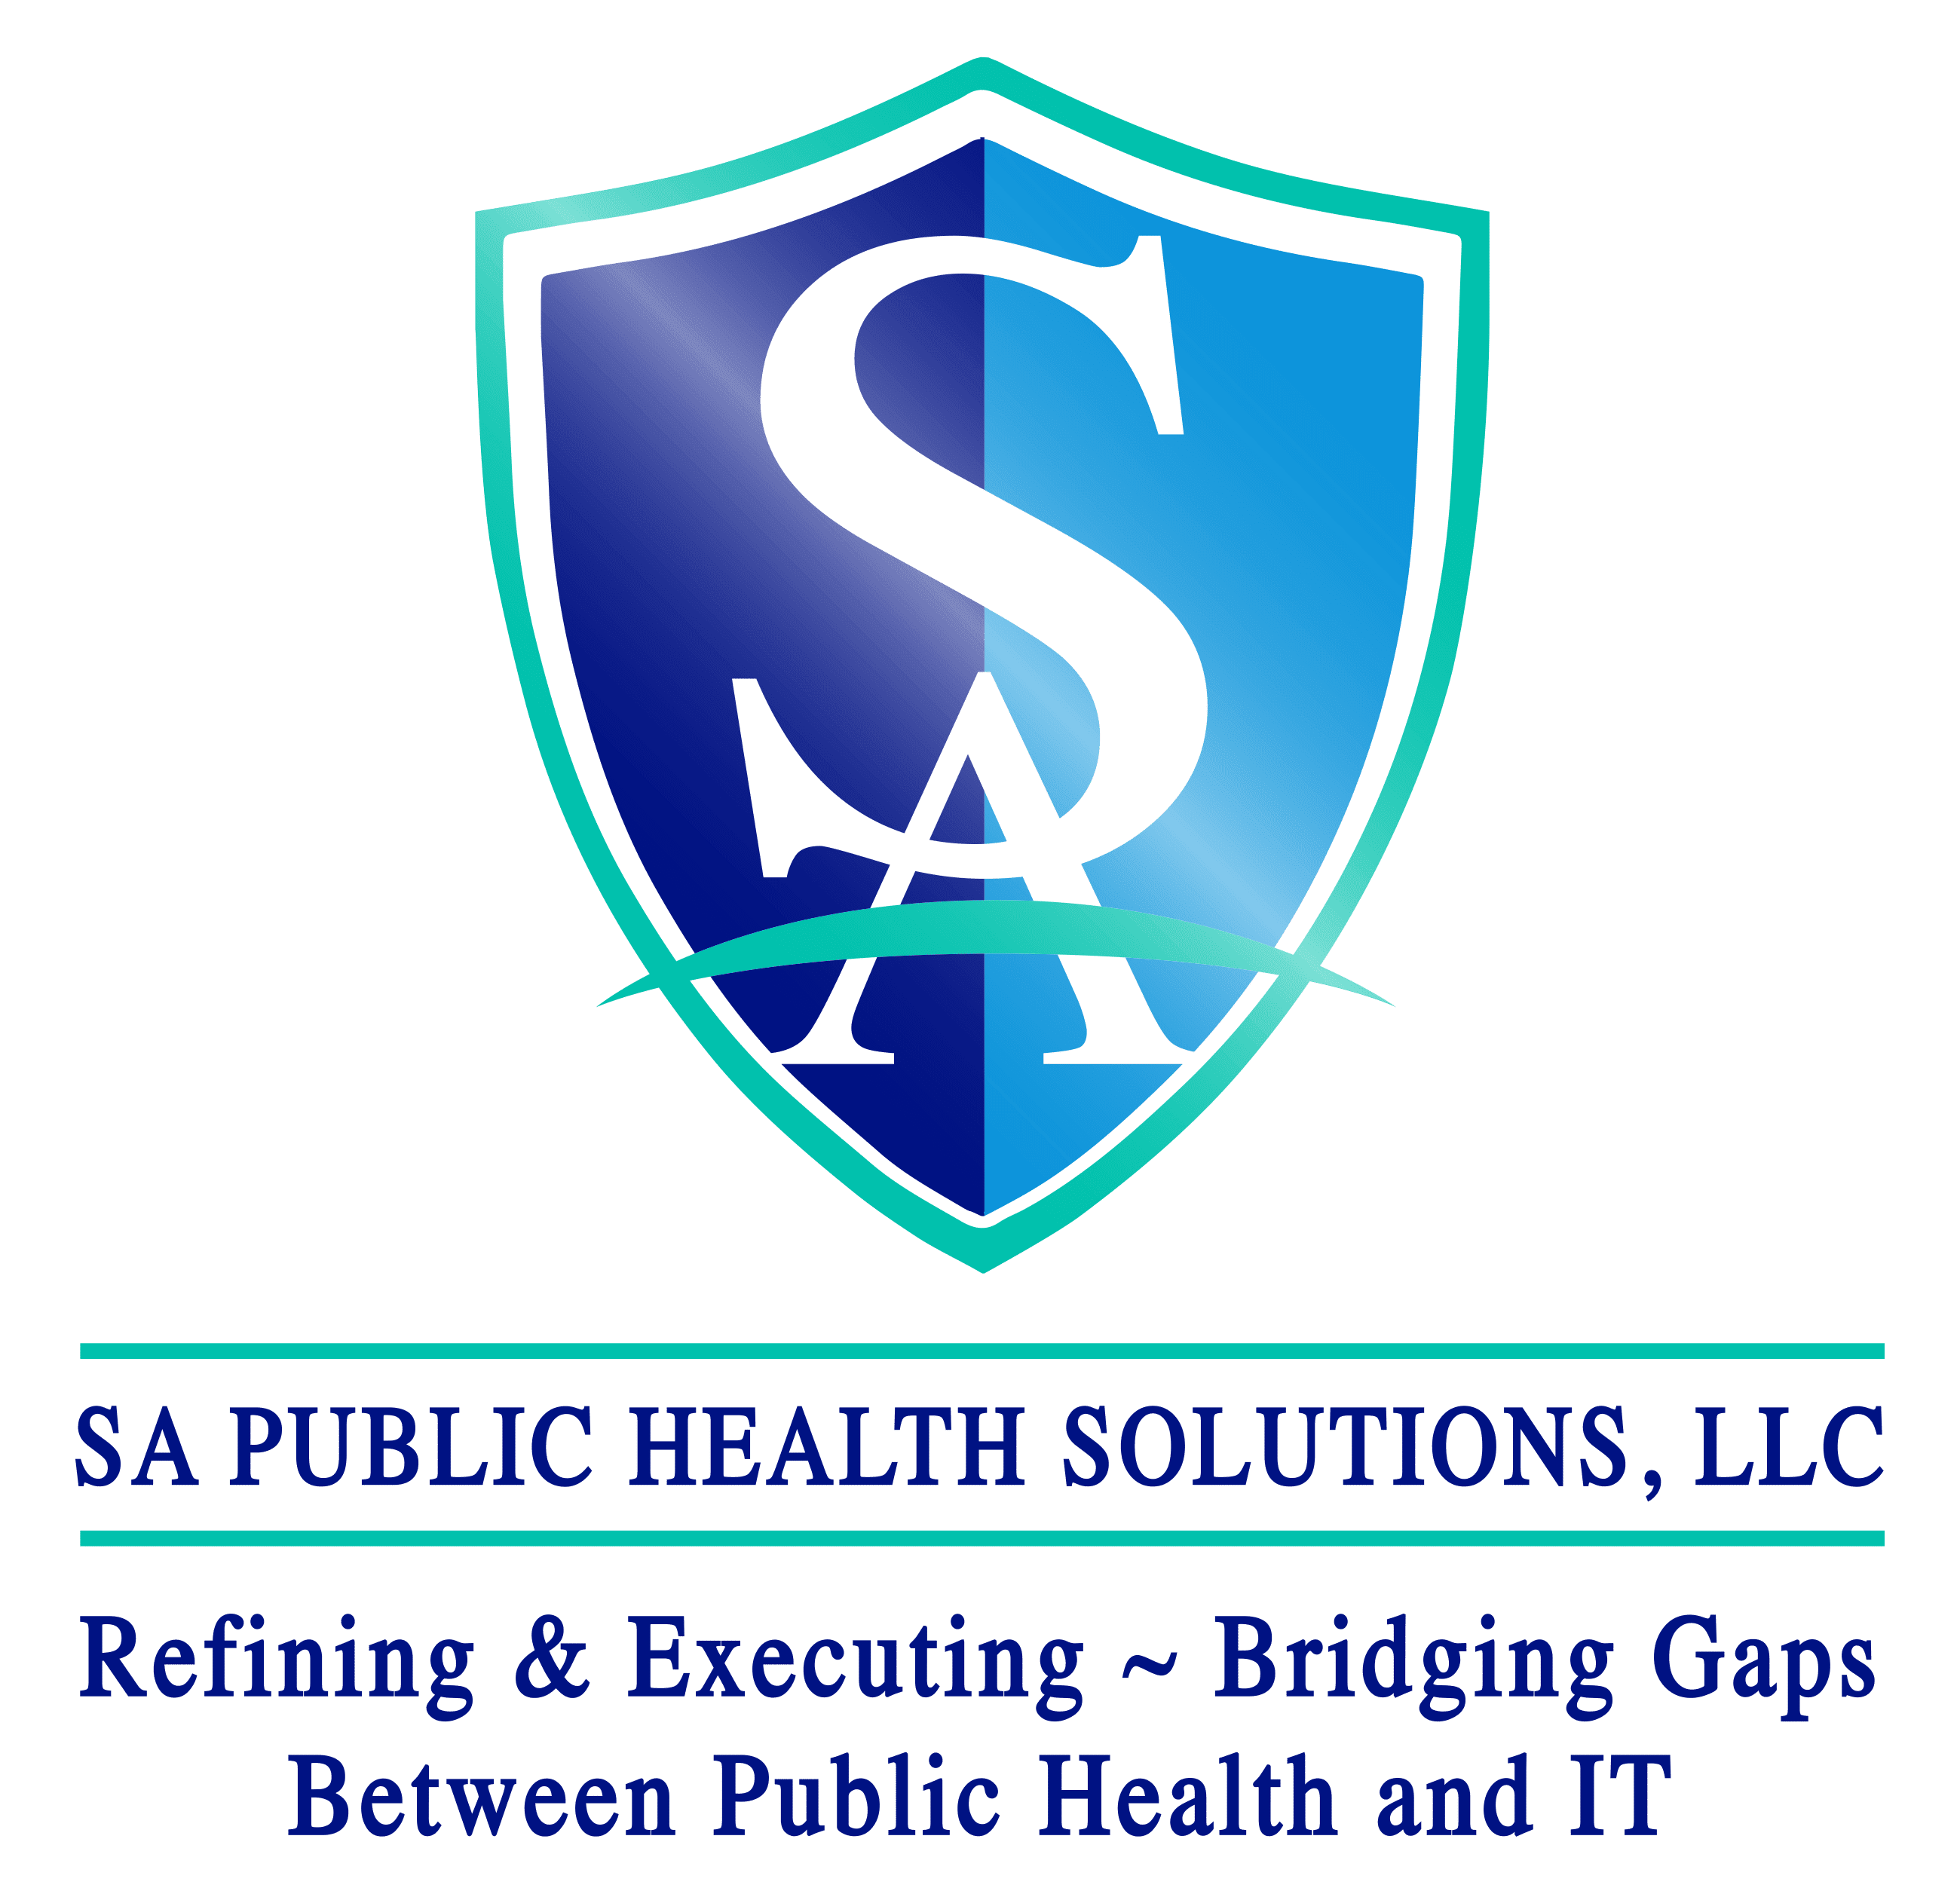 A blue and white logo of sa public health solutions